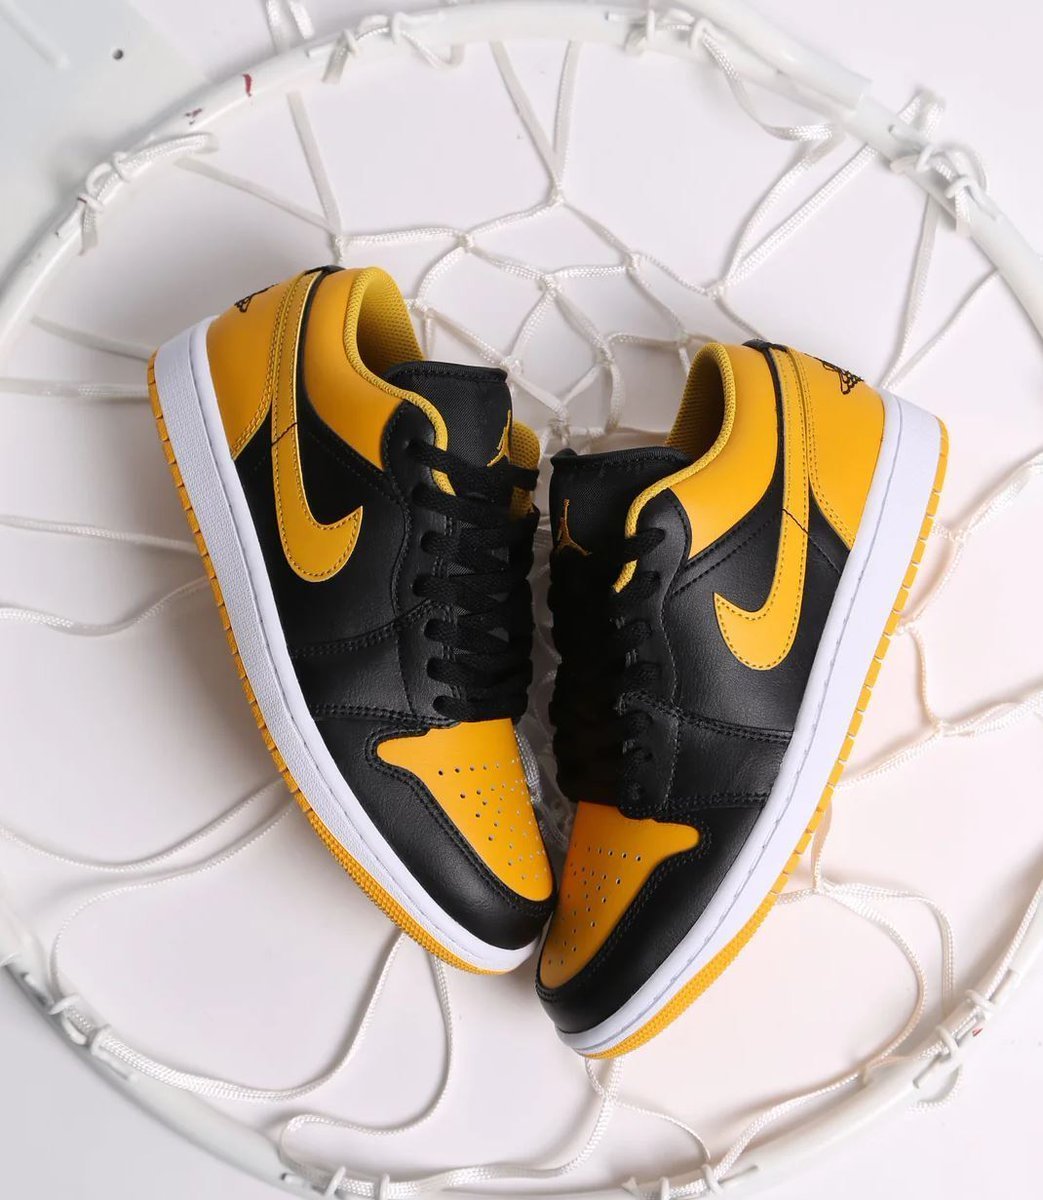 STEAL💥 Air Jordan 1 Low 'Black / Yellow Ochre' $64.77 + Free Shipping bit.ly/3TtKDk8 *use code JUST4MOM at checkout*